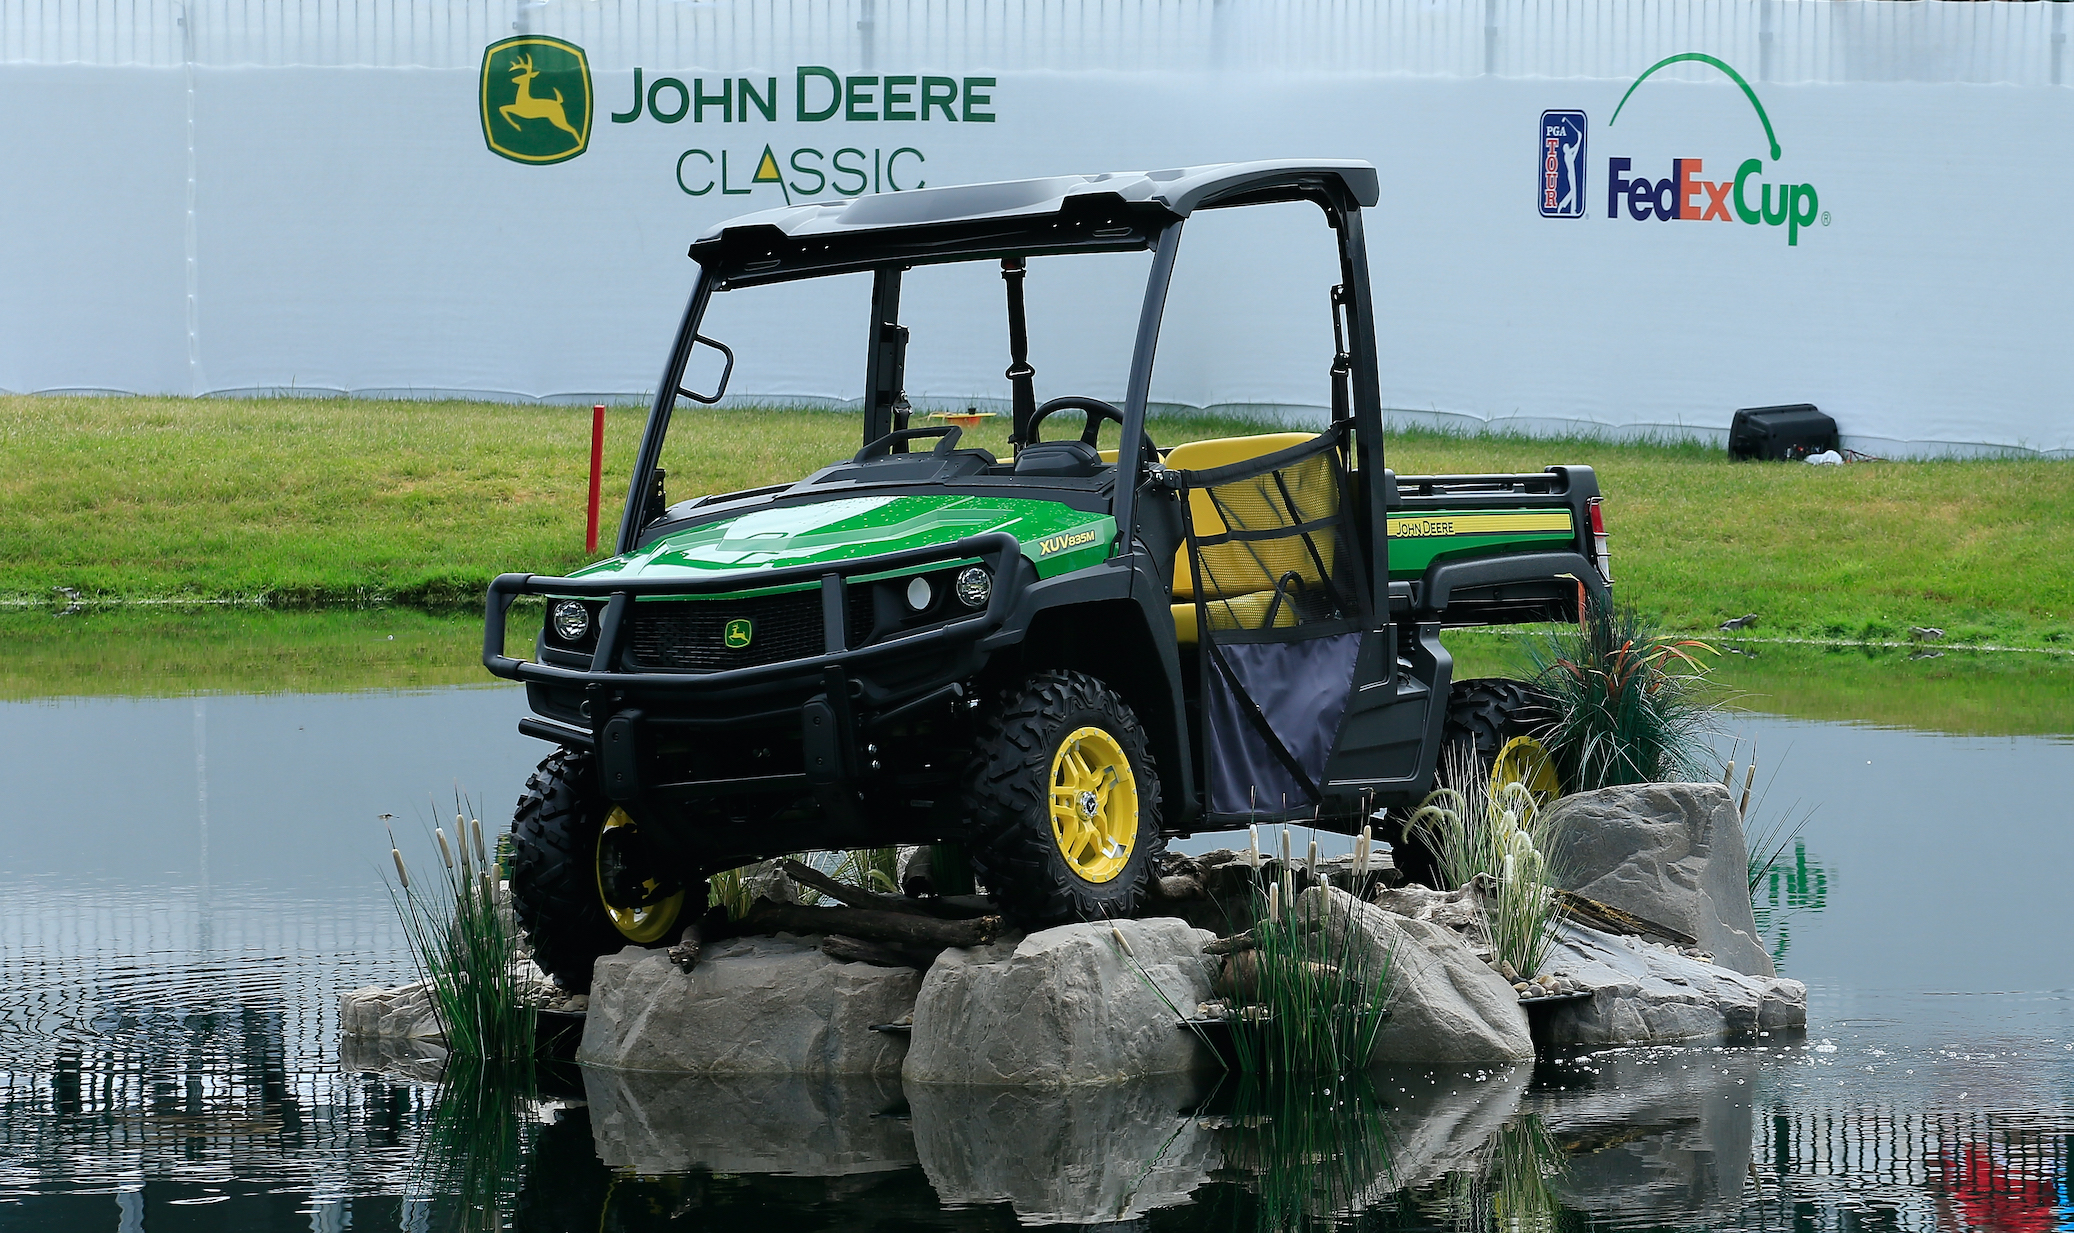 A John Deere Gator vehicle is seen adjacent to the 18th green during the fourth and final round of the John Deere Classic